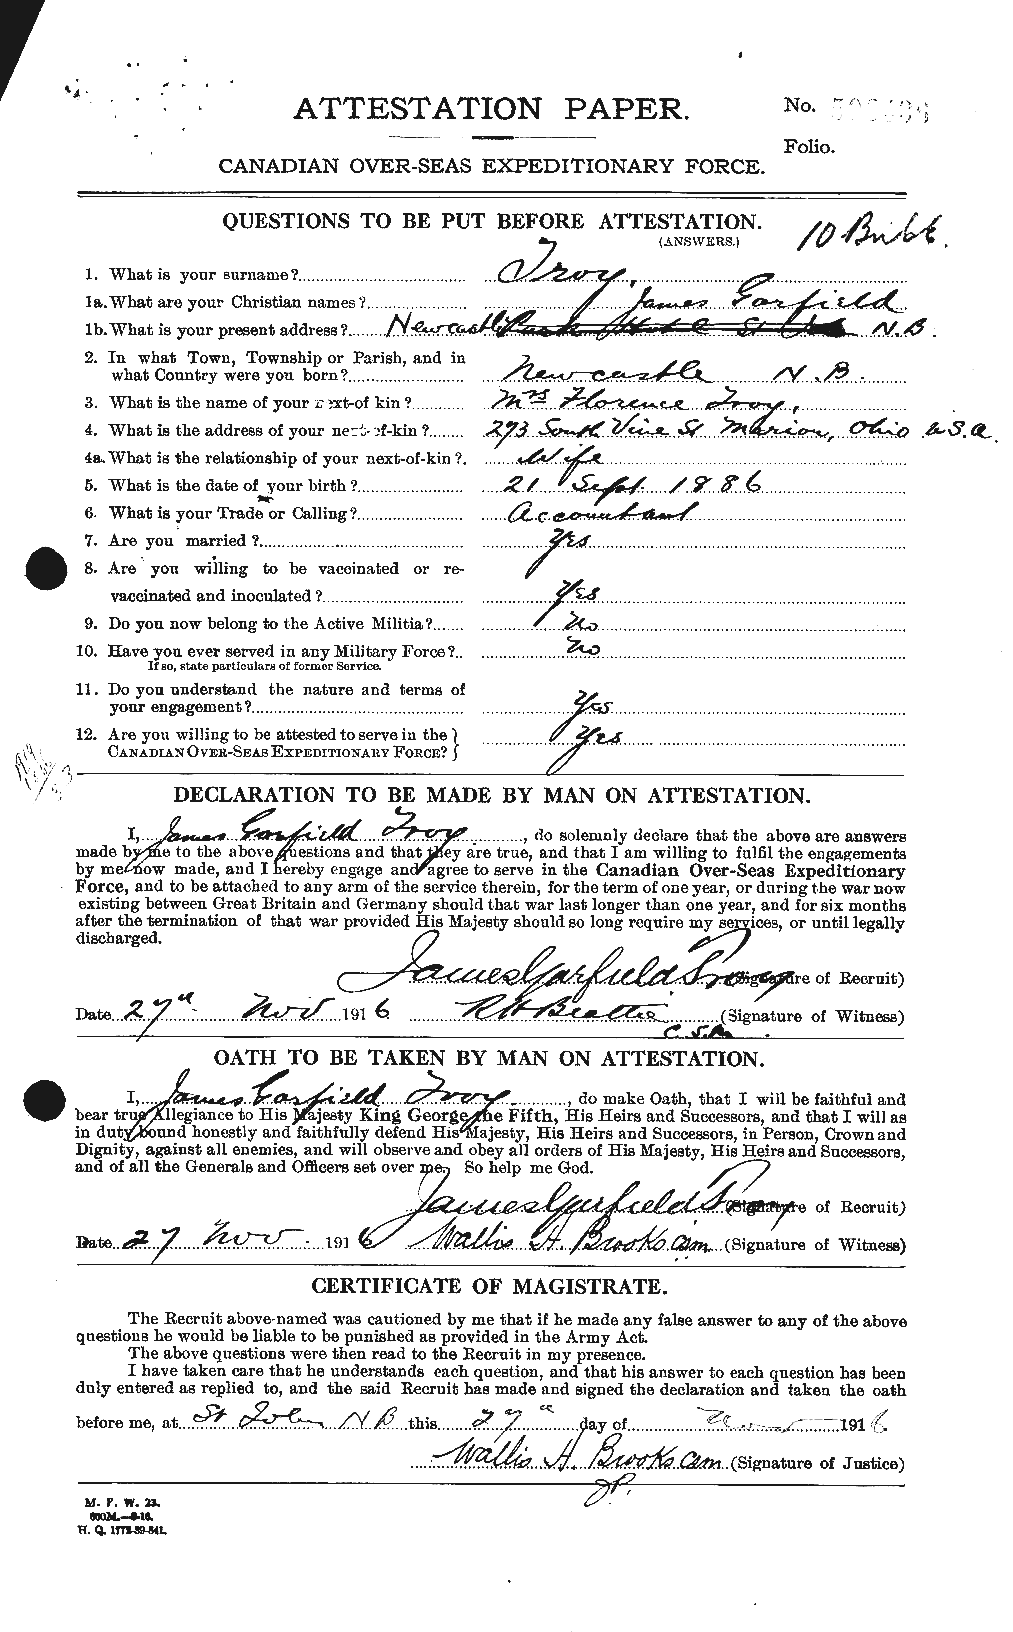 Personnel Records of the First World War - CEF 641855a